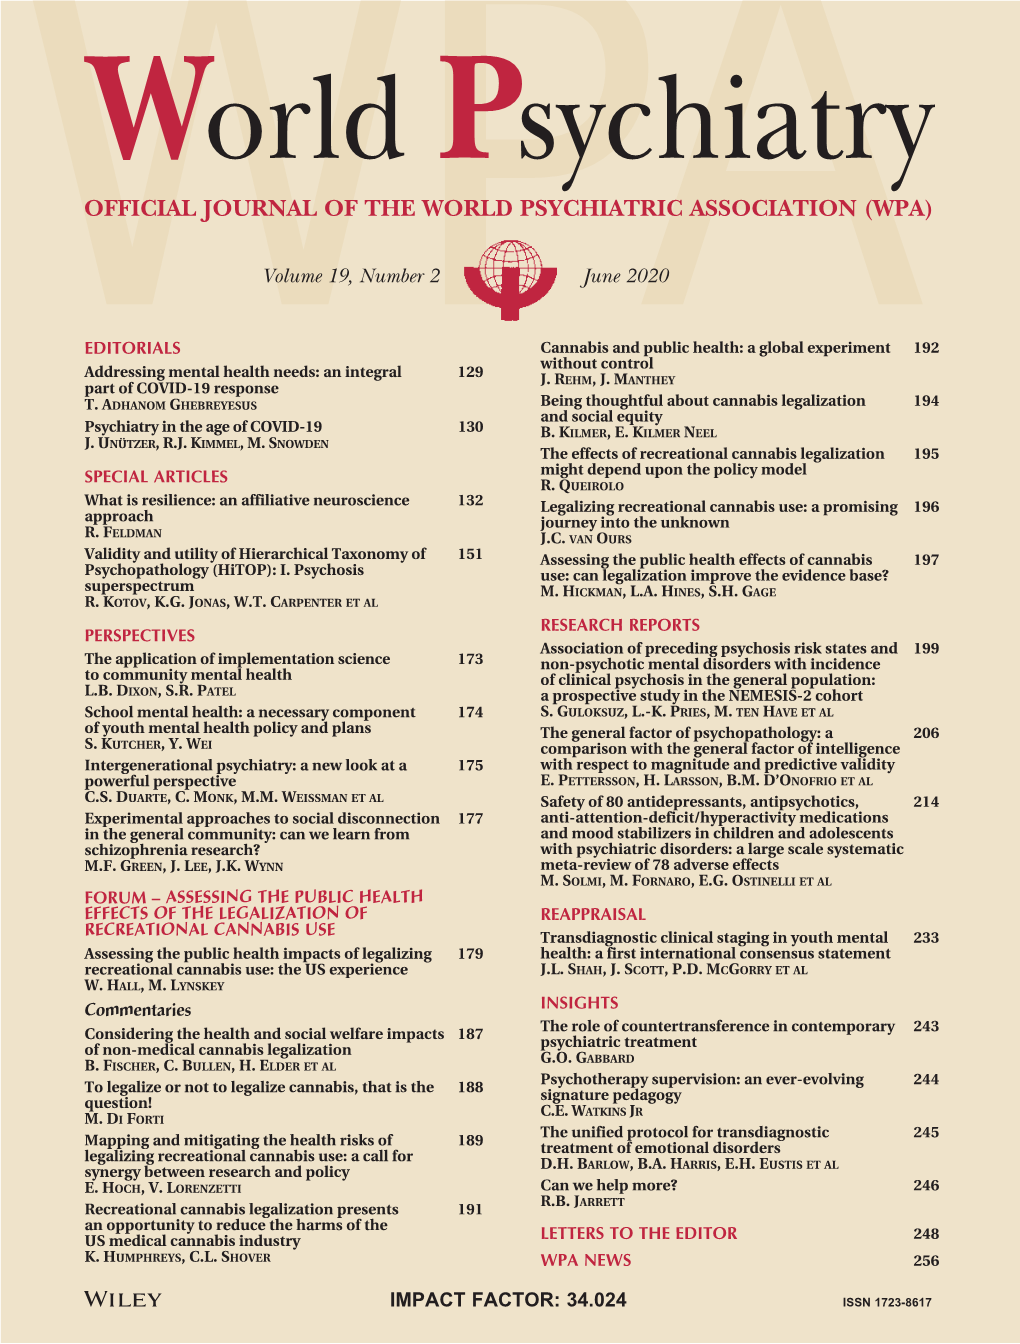 Official Journal of the World Psychiatric Association (Wpa)